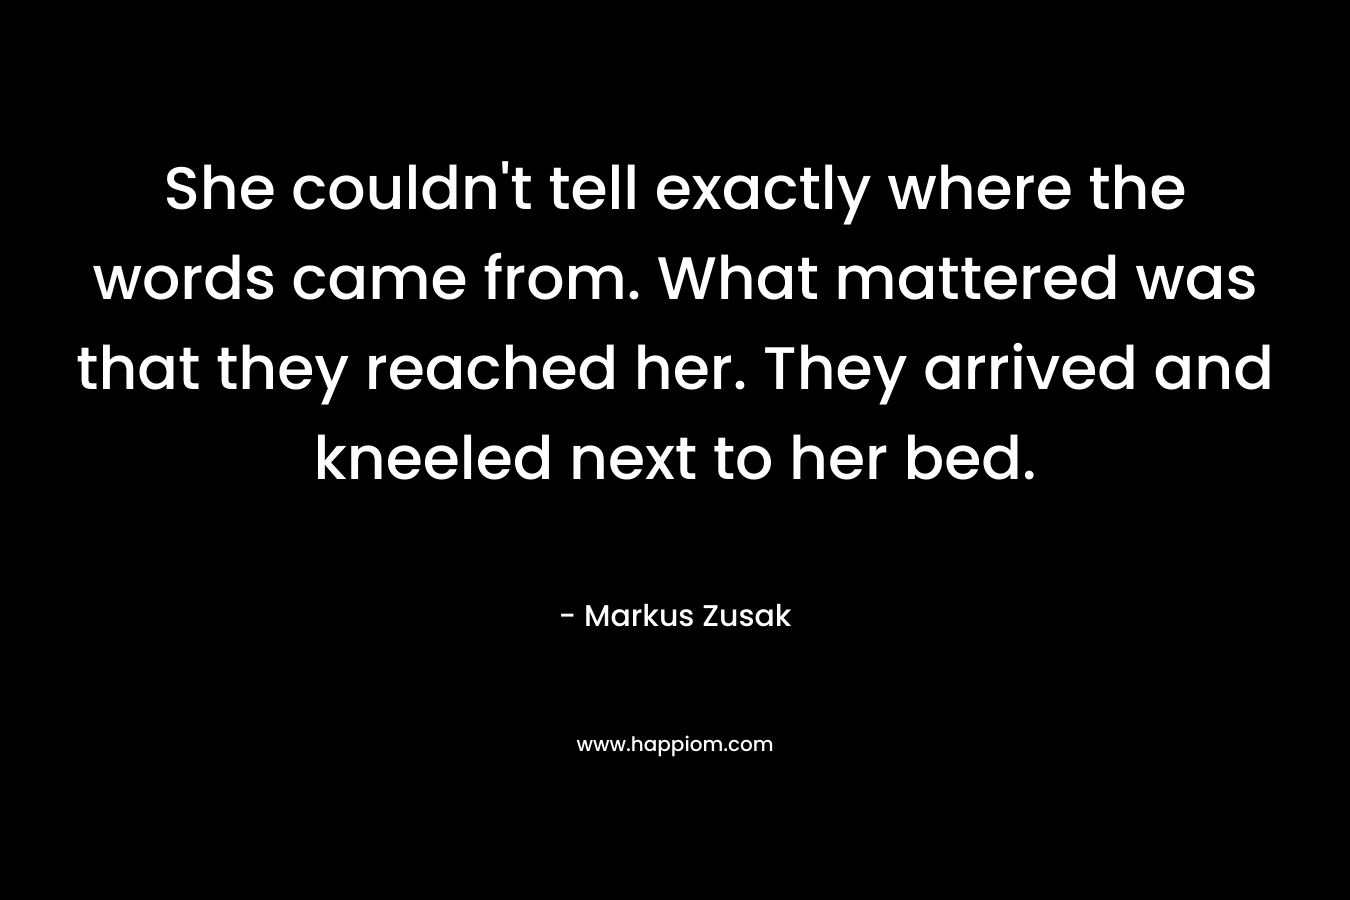 She couldn’t tell exactly where the words came from. What mattered was that they reached her. They arrived and kneeled next to her bed. – Markus Zusak